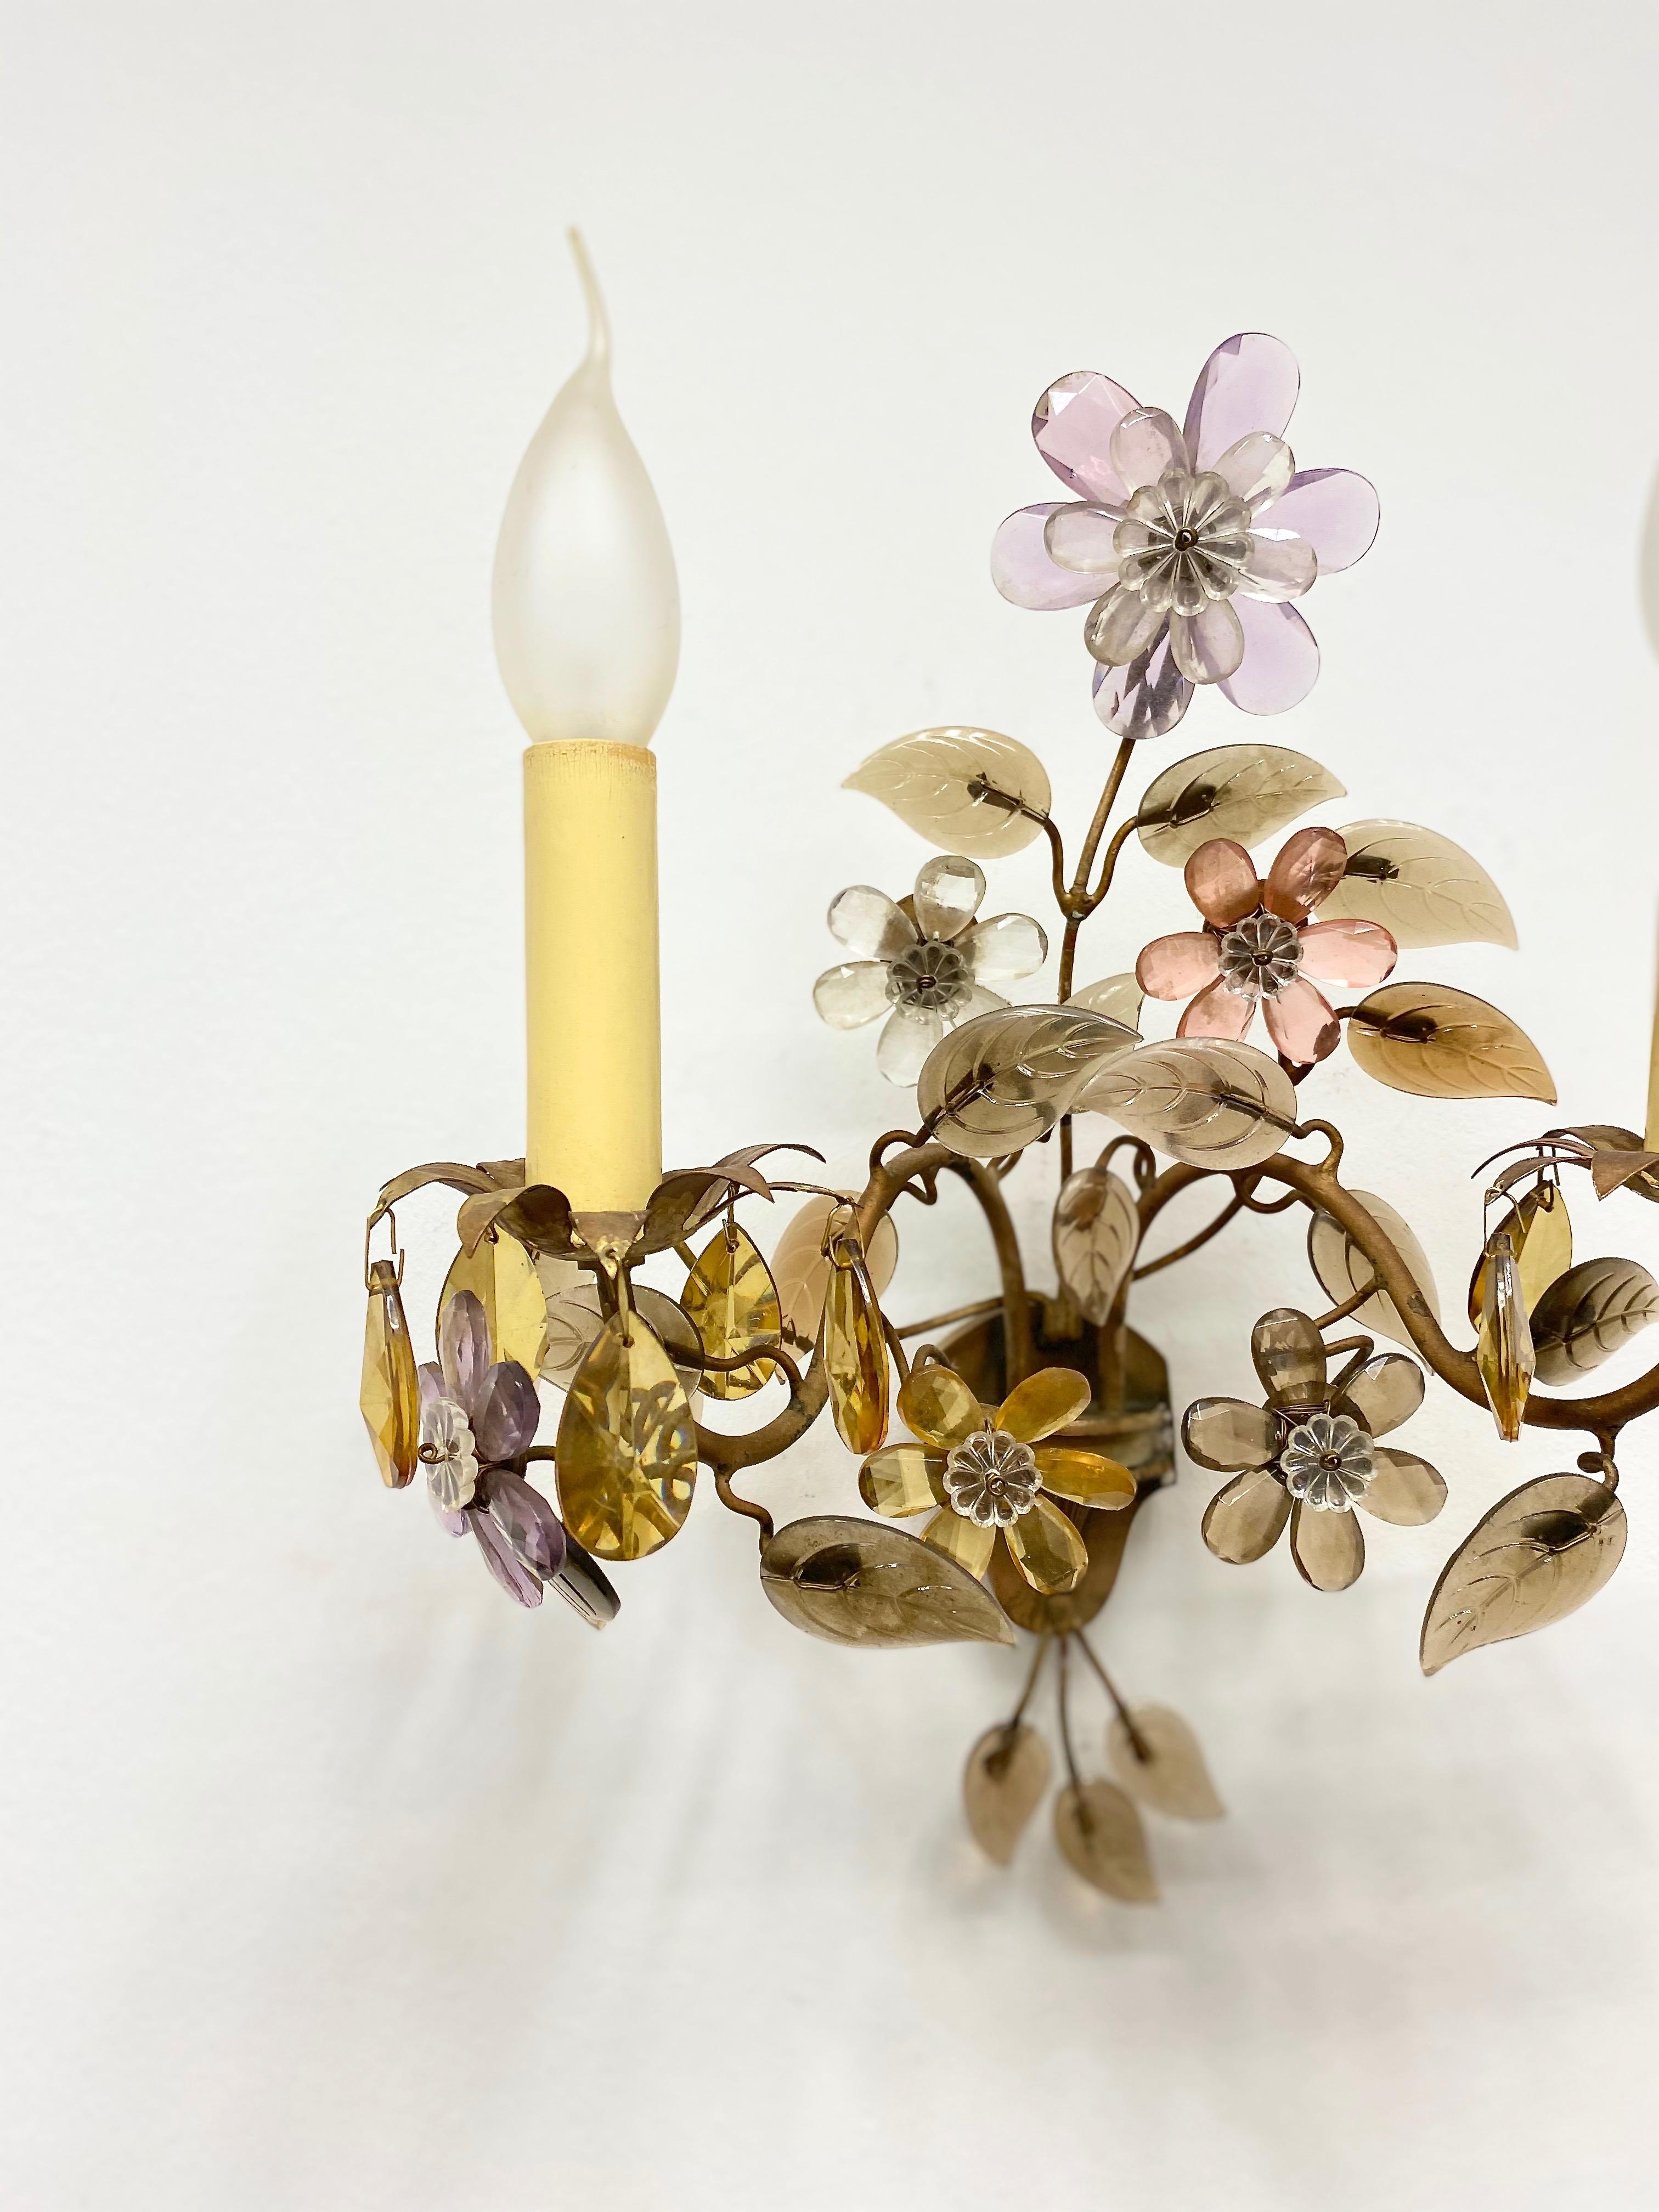 A single iron floral sconce by Banci Firenze with crystal flowers and leaves. The fixture requires two European E14 candelabra bulbs, each bulb up to 40 watts. The wall light has a beautiful patina and gives each room an eclectic statement. Made of